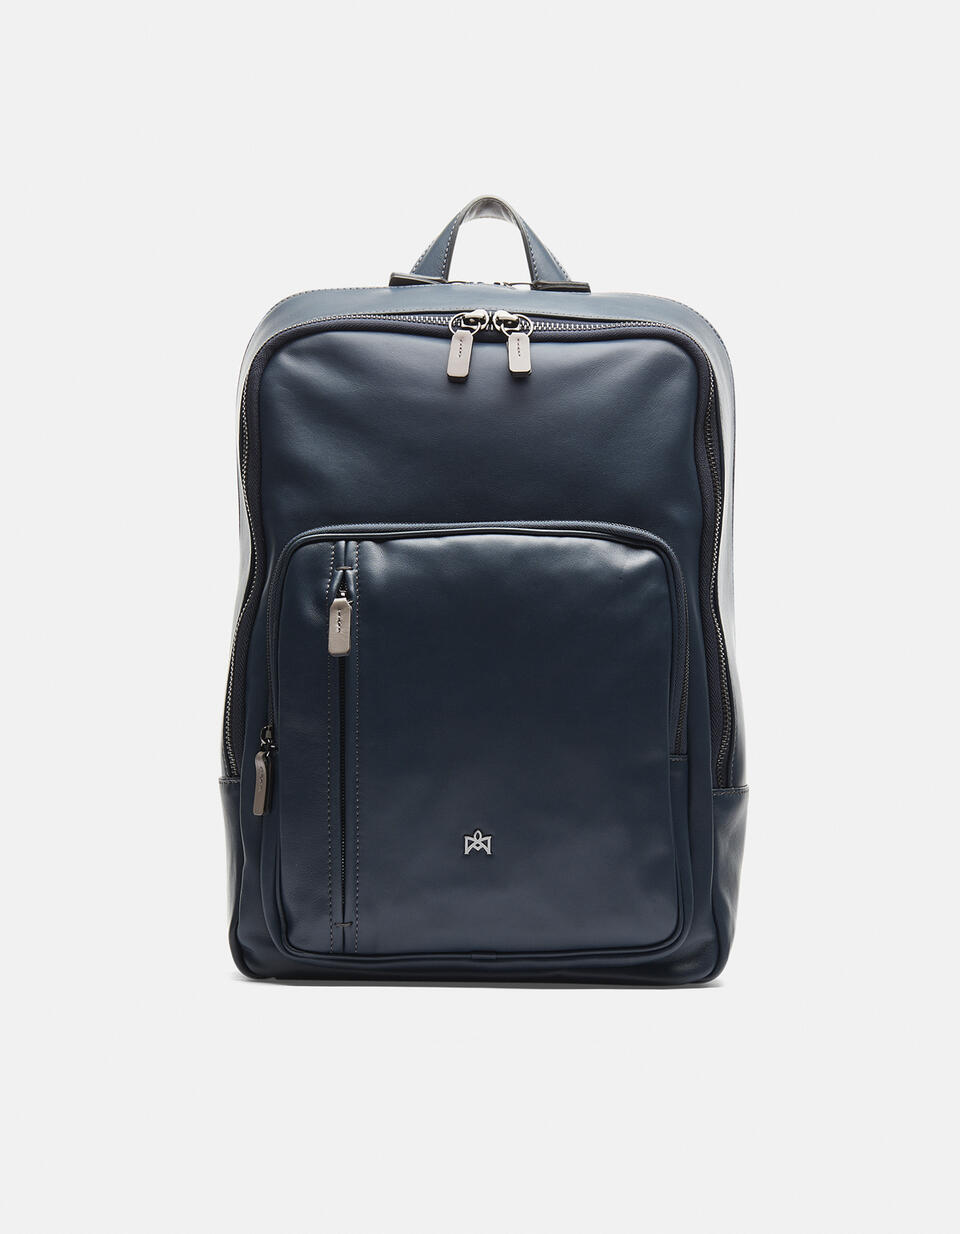 Business backpack  - Backpacks - Men's Bags - Bags - Cuoieria Fiorentina